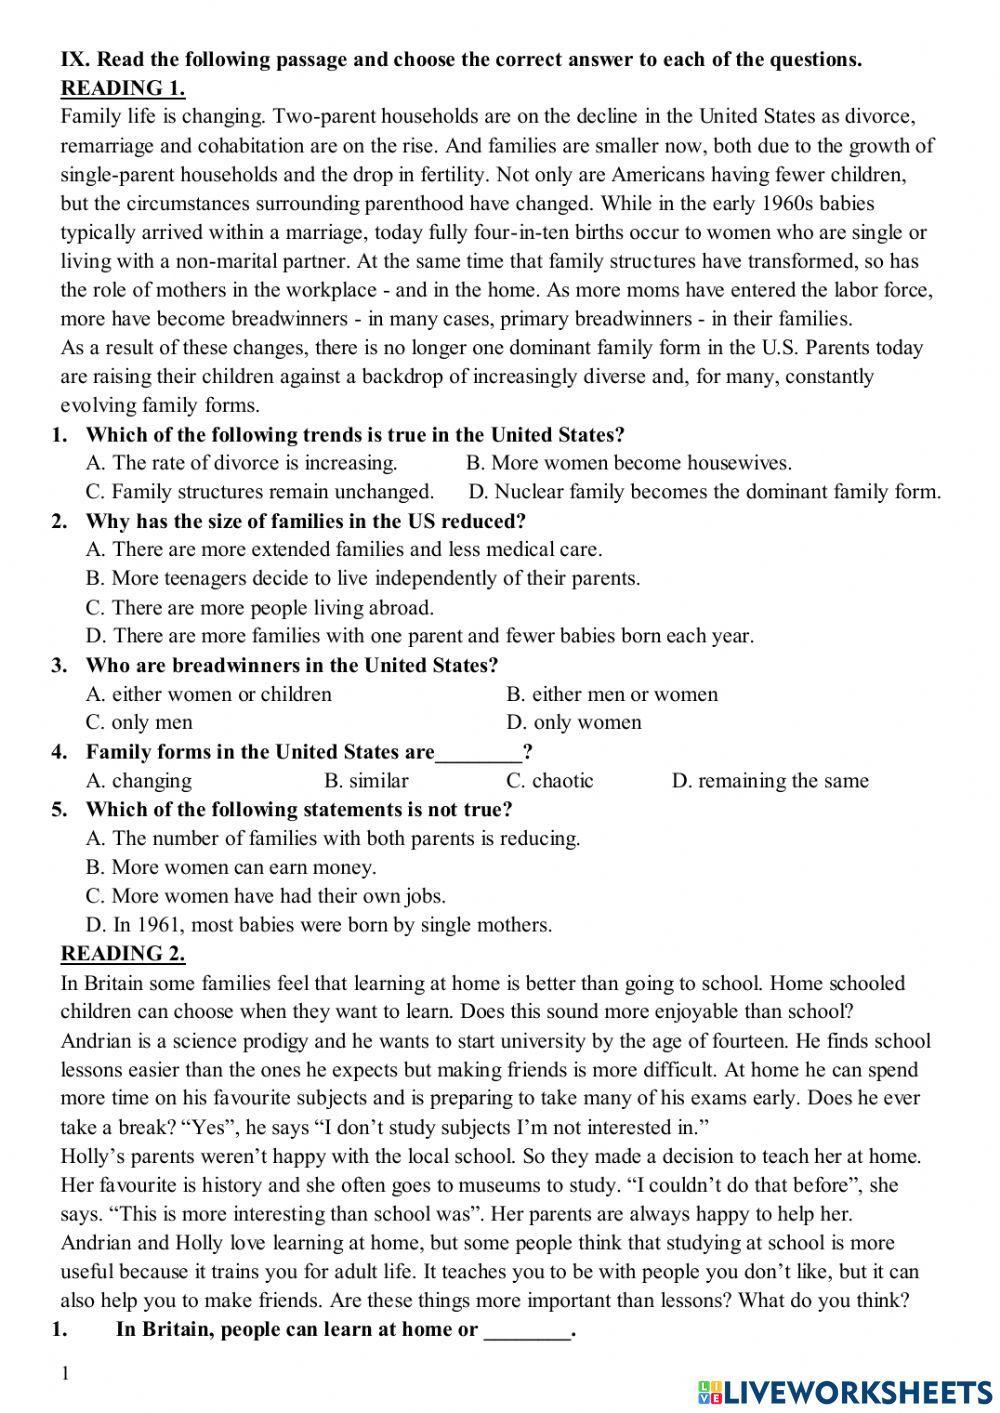 Grade 9- Revision for 1st term test- Reading 9